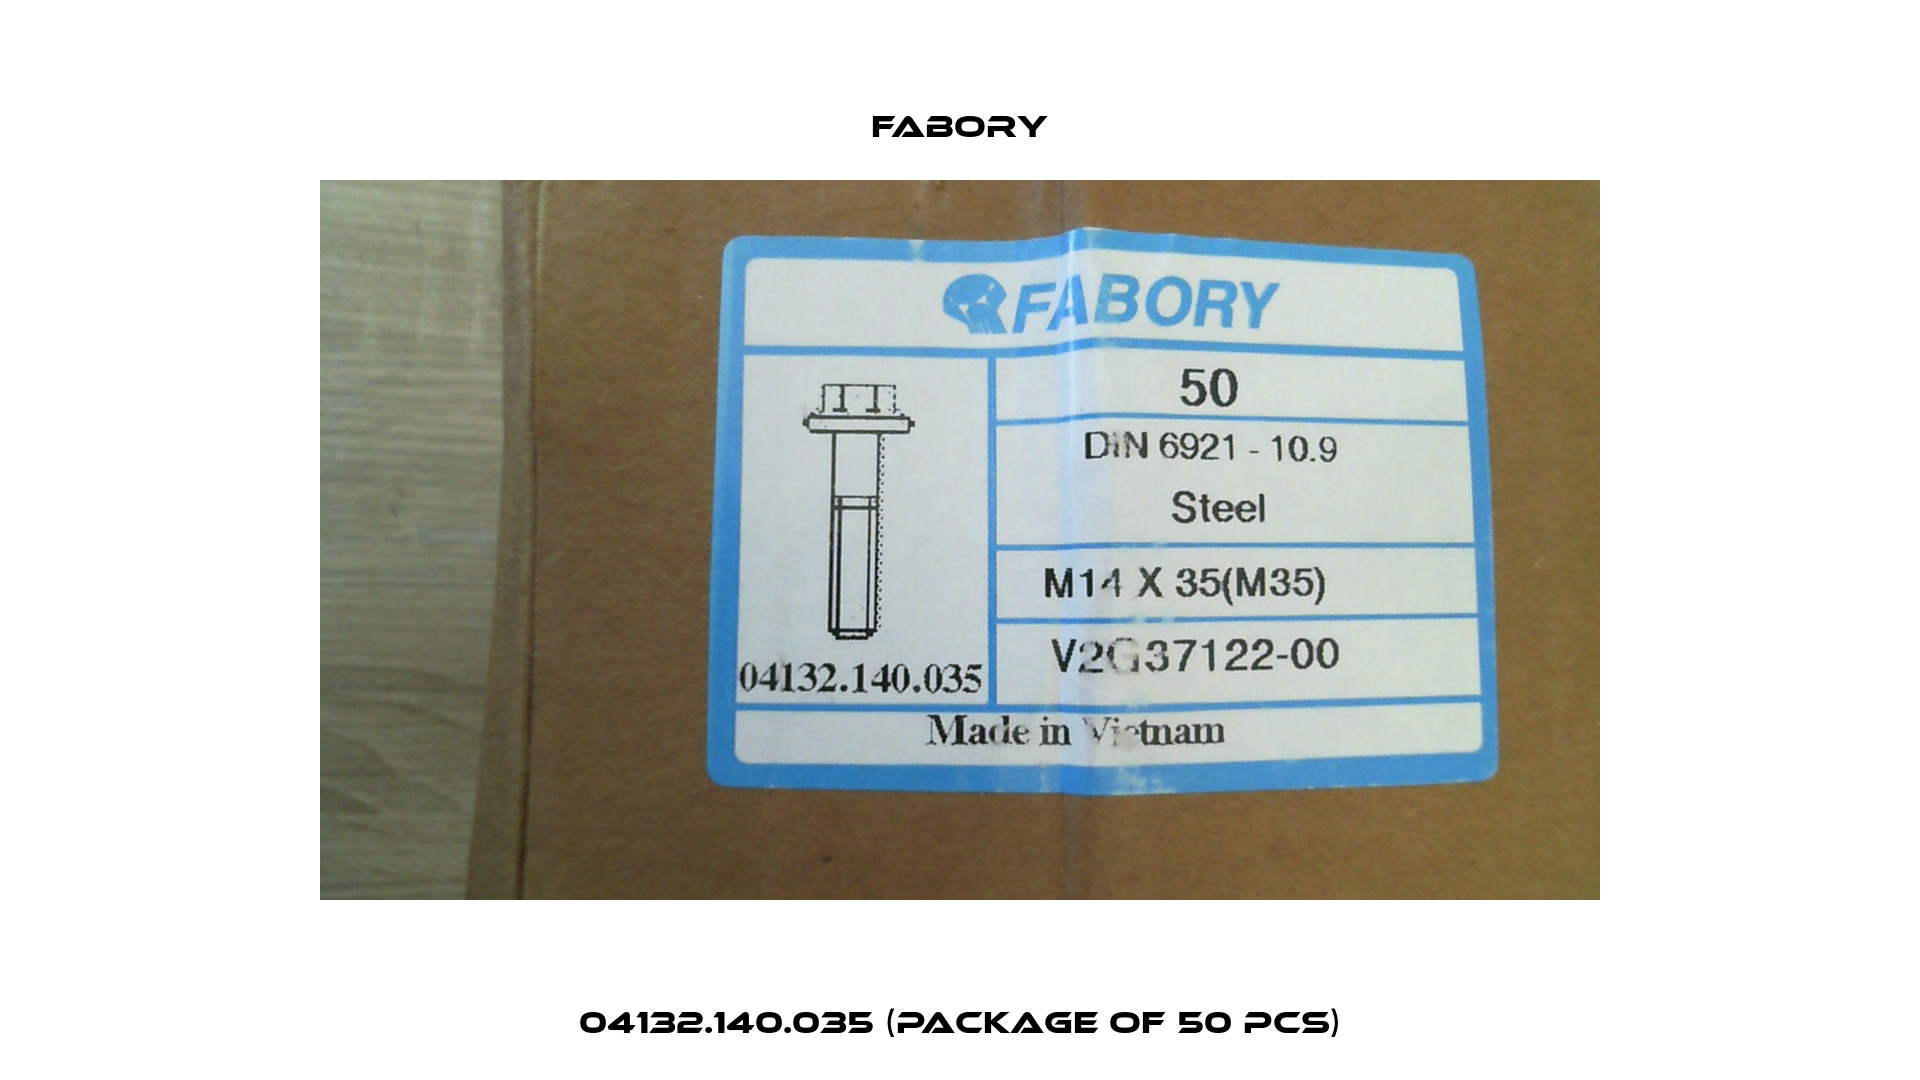 04132.140.035 (package of 50 pcs) Fabory